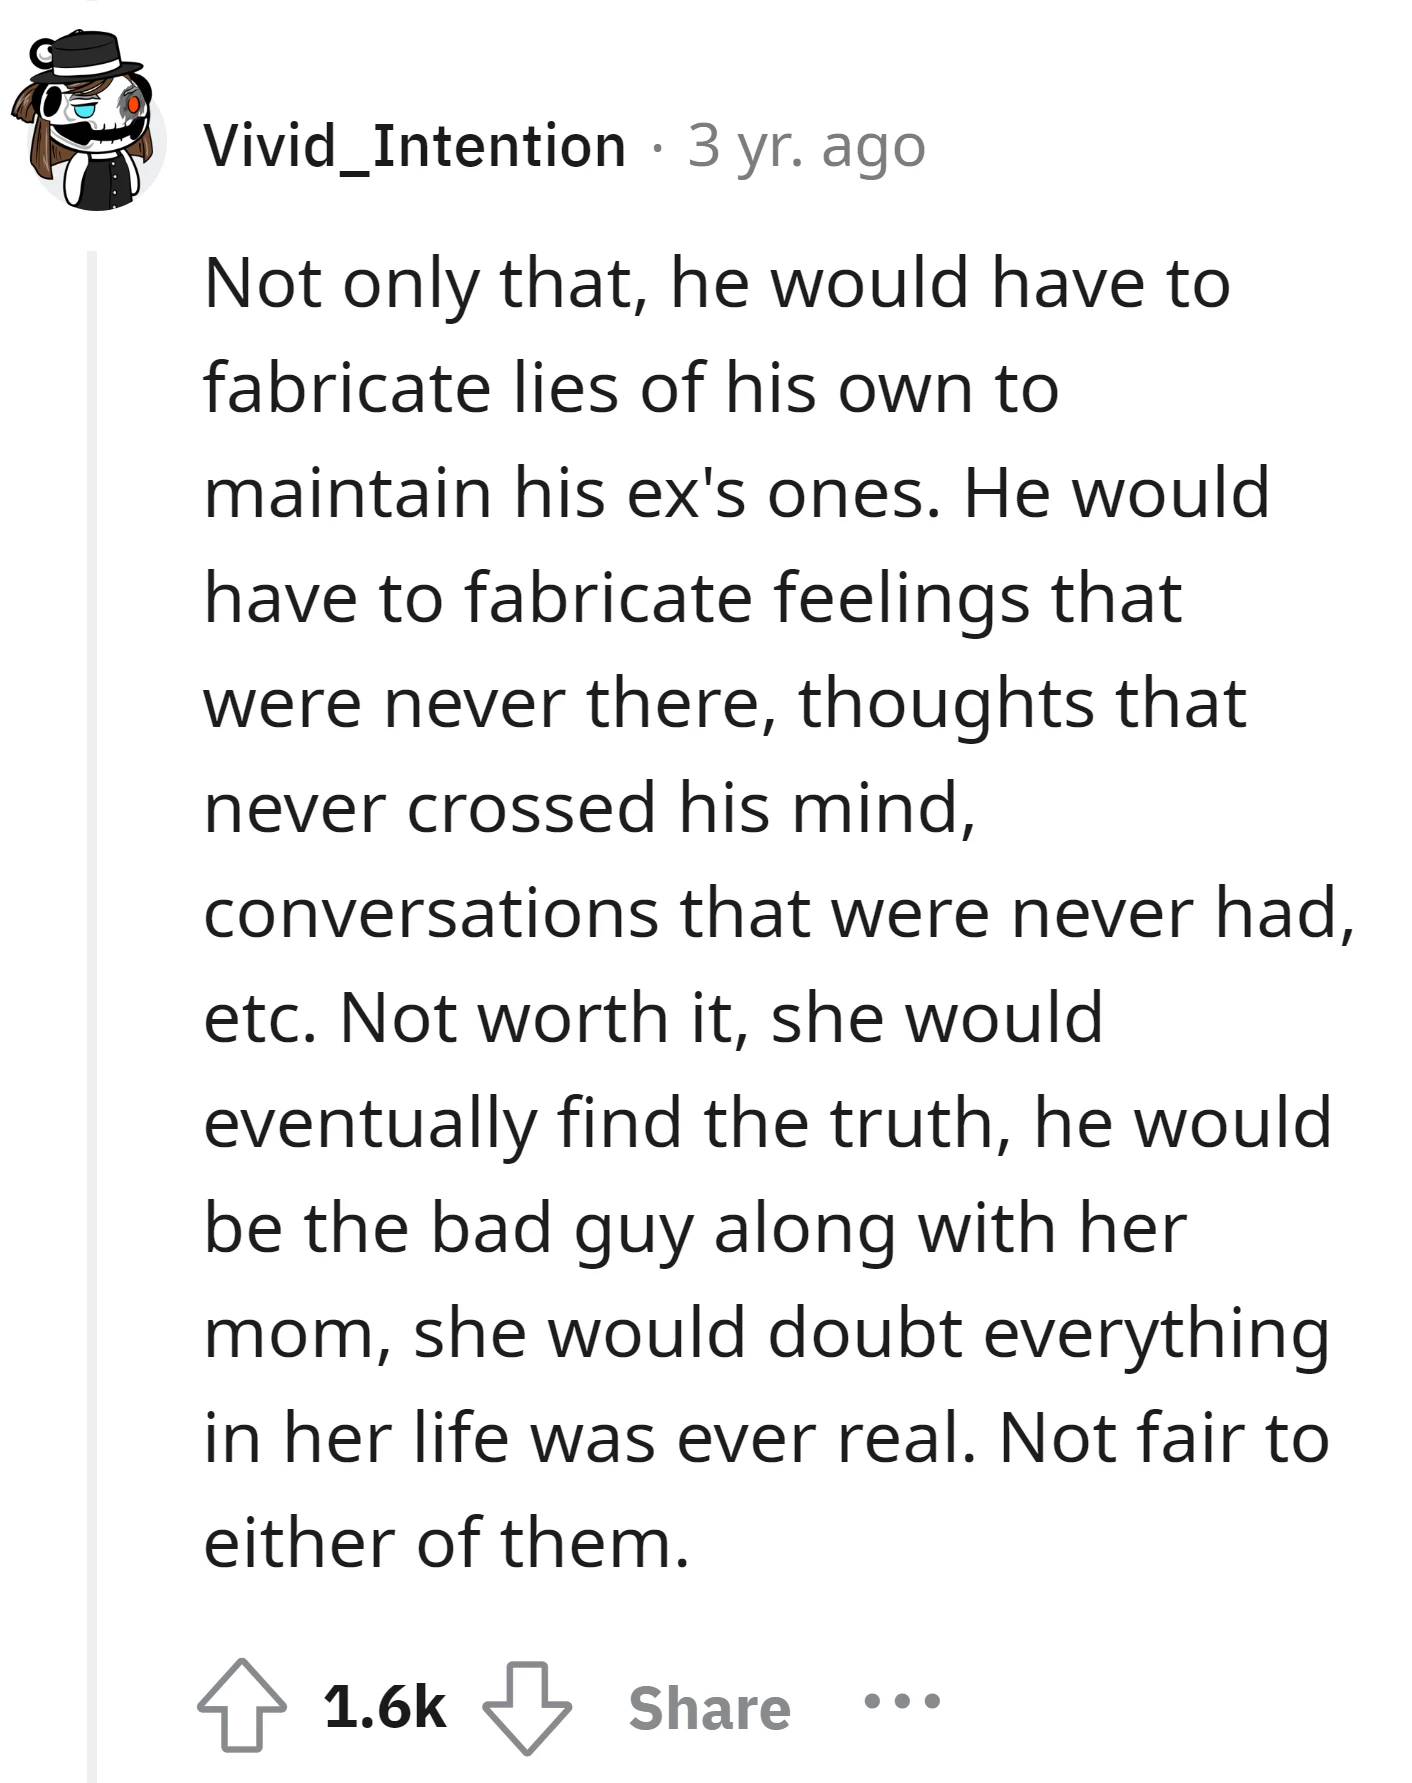 OP shouldn't have to create false narratives and pretend emotions to uphold the ex's lies